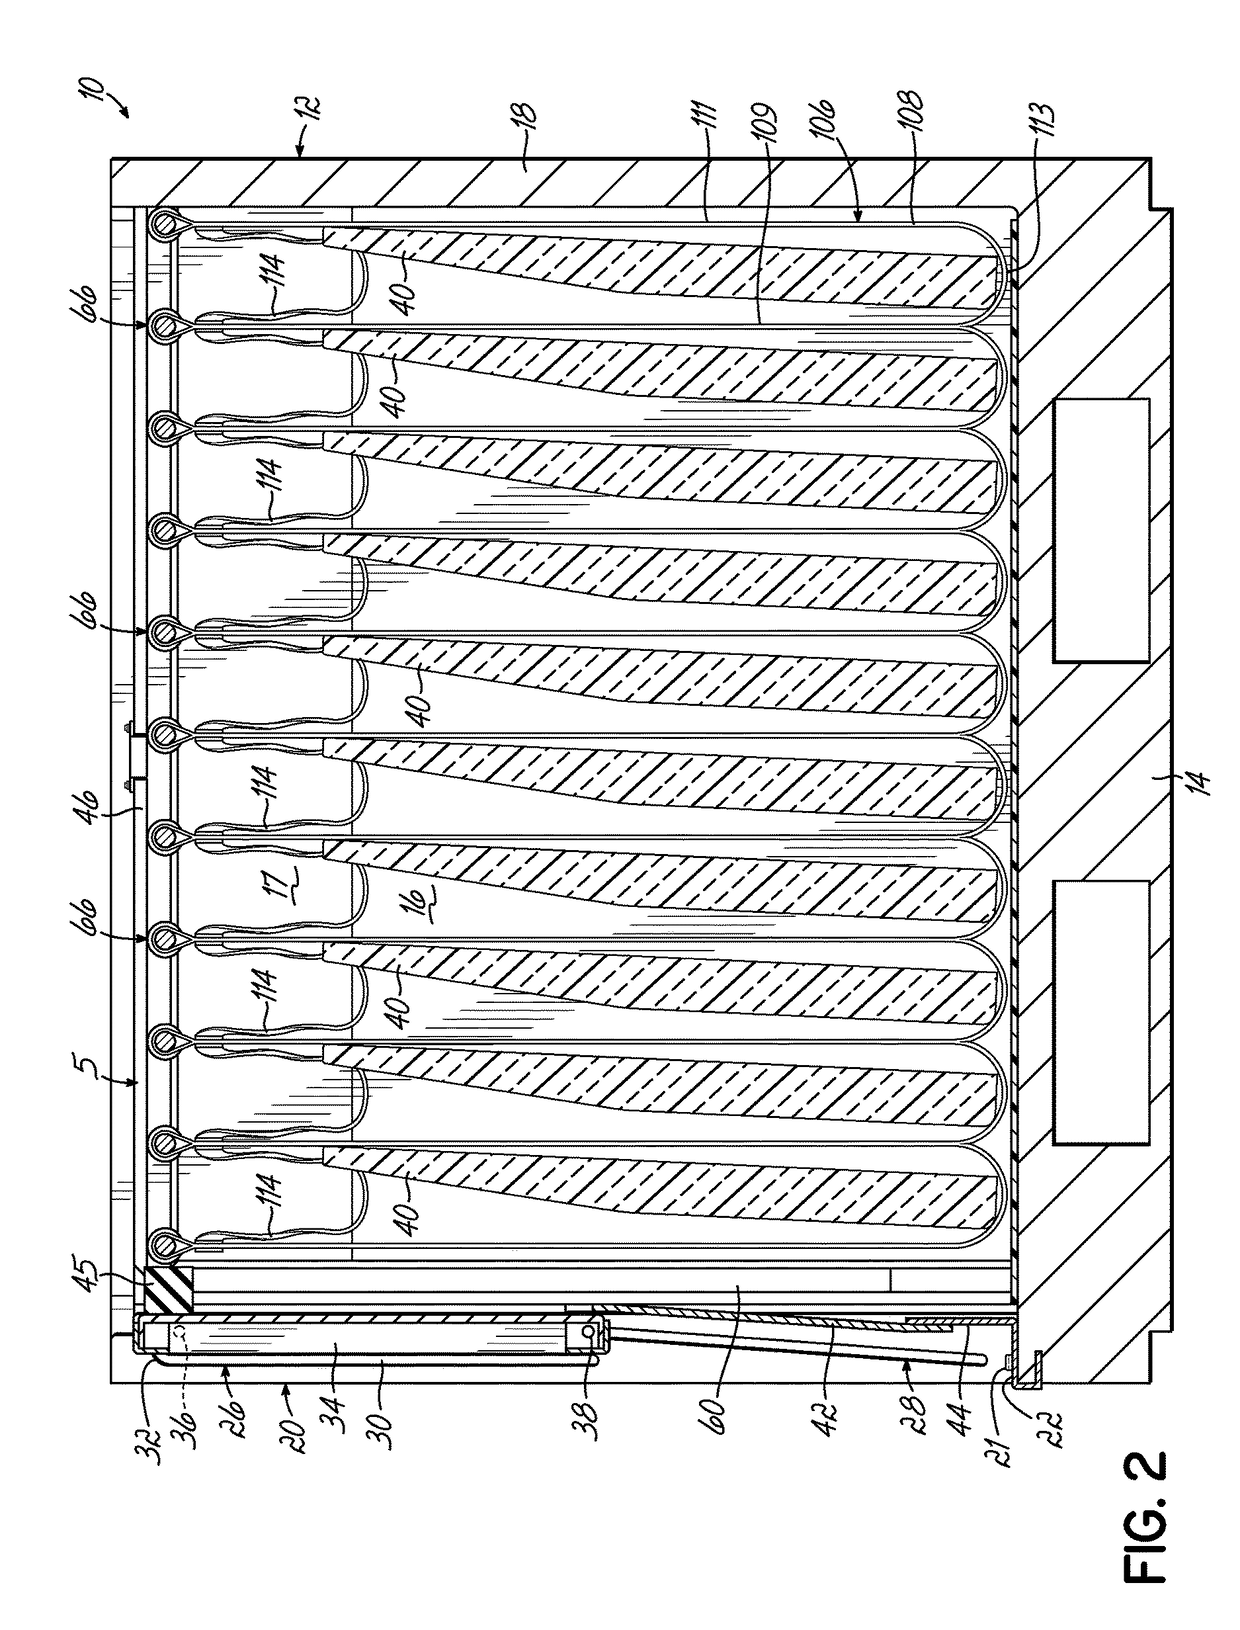 Container having generally L-shaped slotted tracks to facilitate movement of dunnage